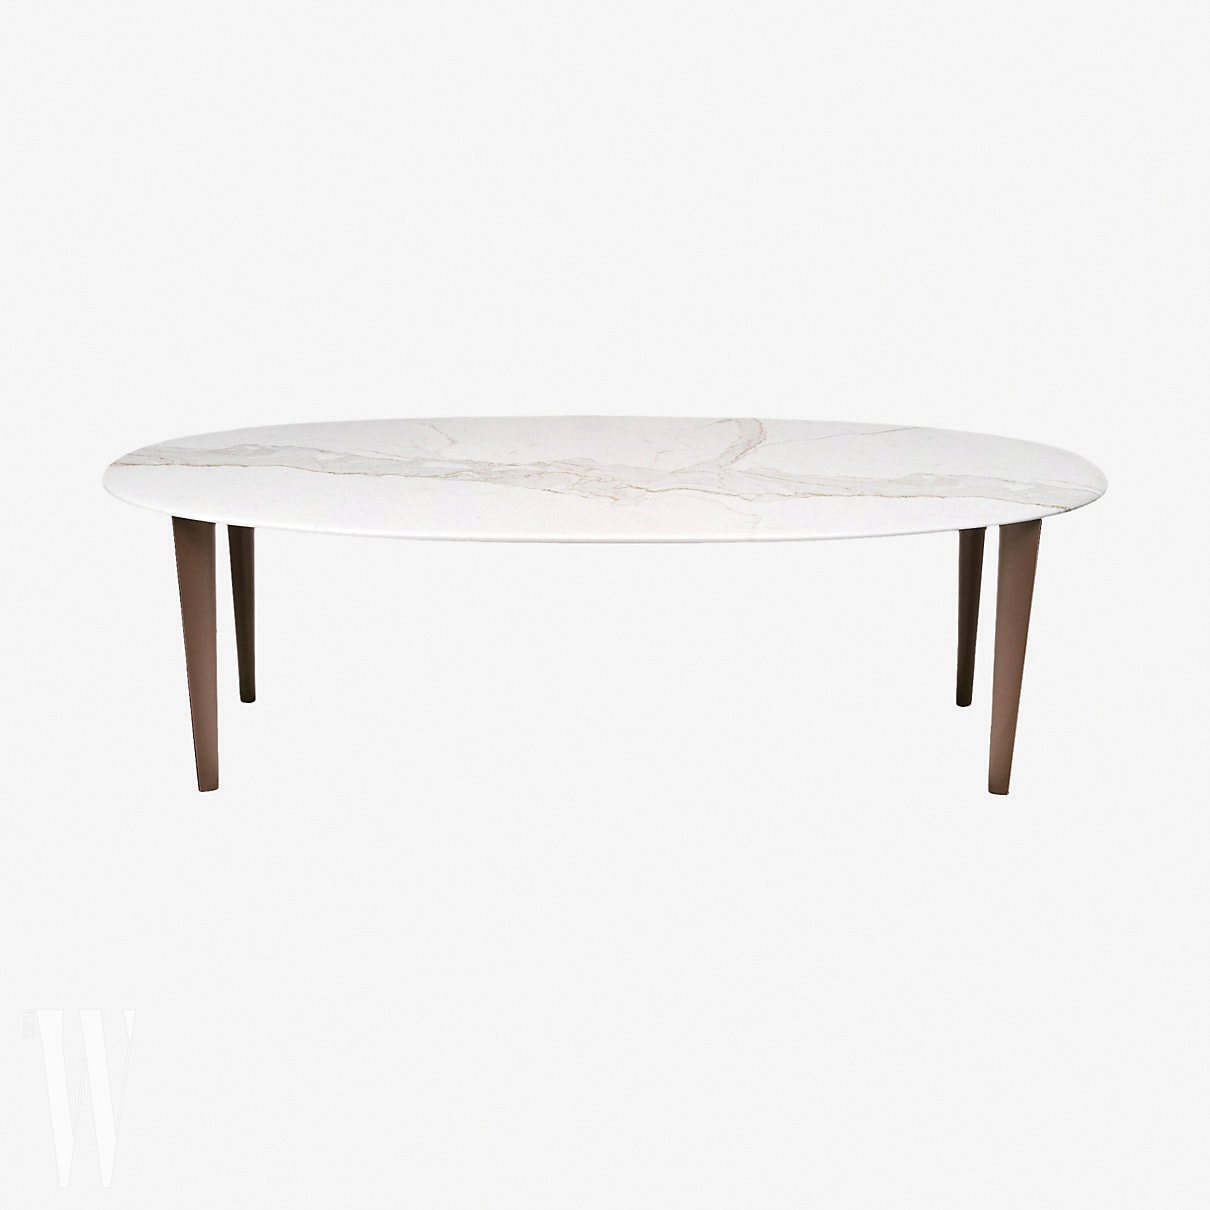 metiers-oval-table--920024M 03-front-1-300-0-1210-1210